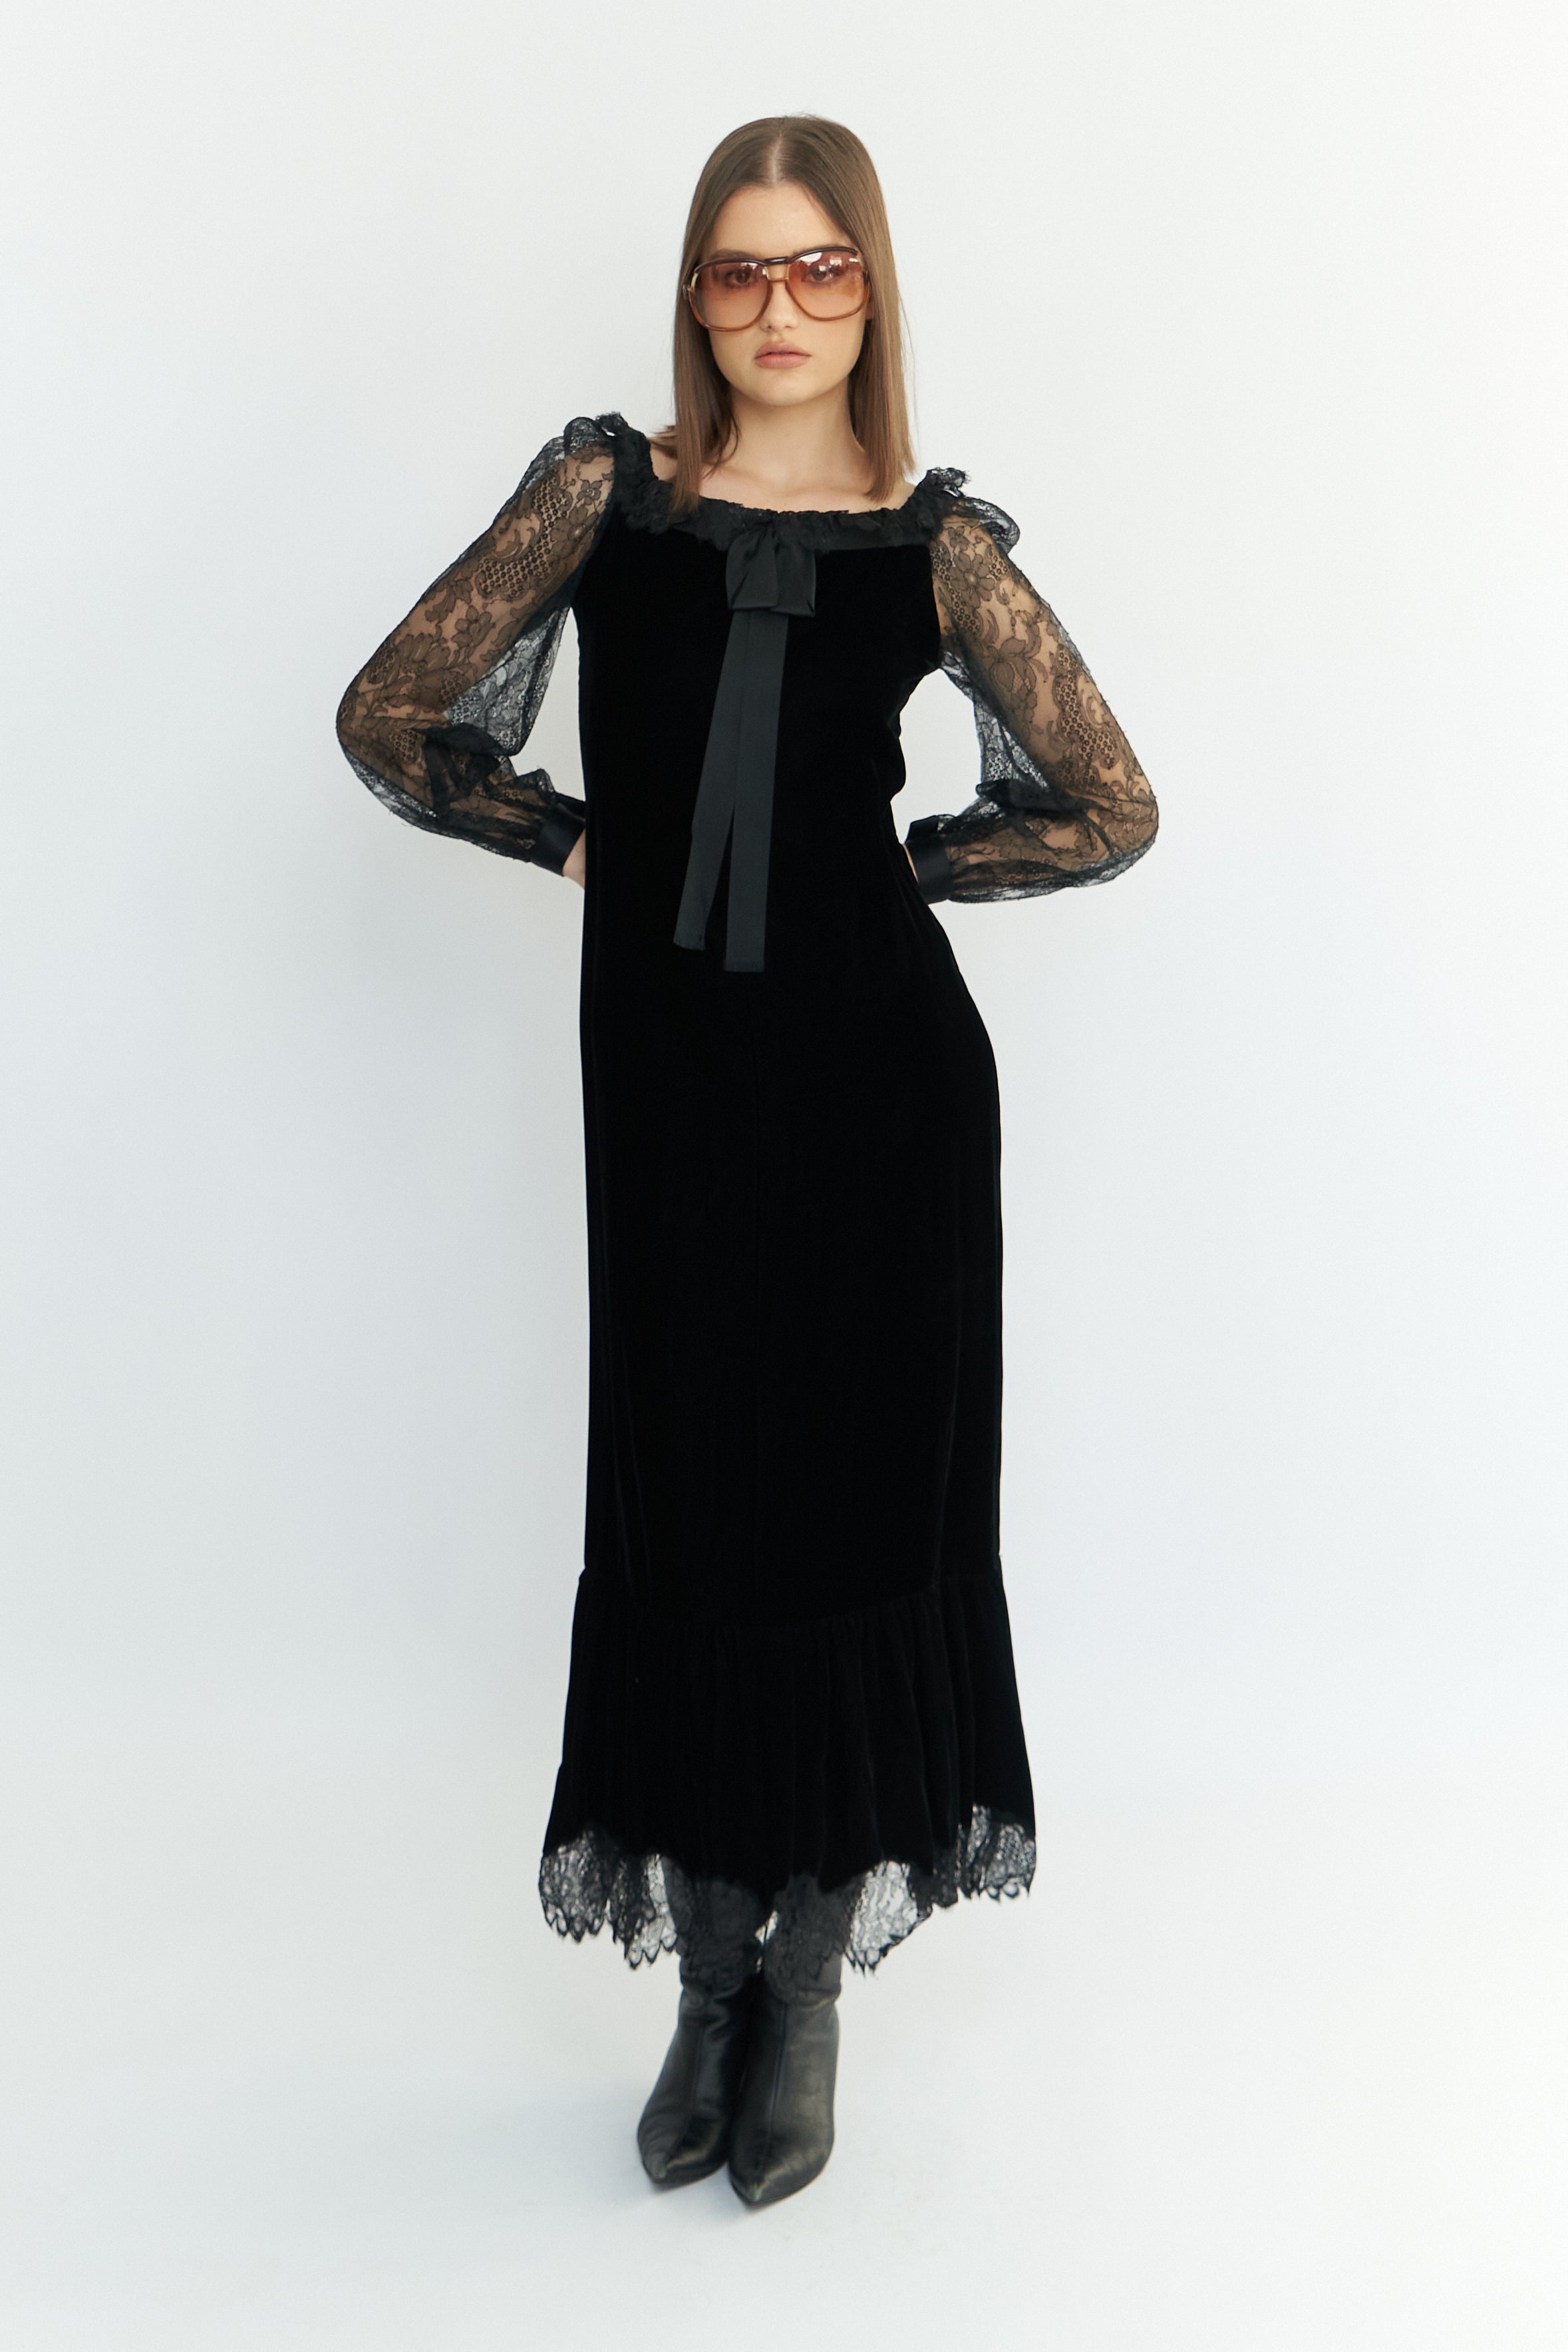 Givenchy <br> A/W 1977 Haute Couture velvet & lace gown